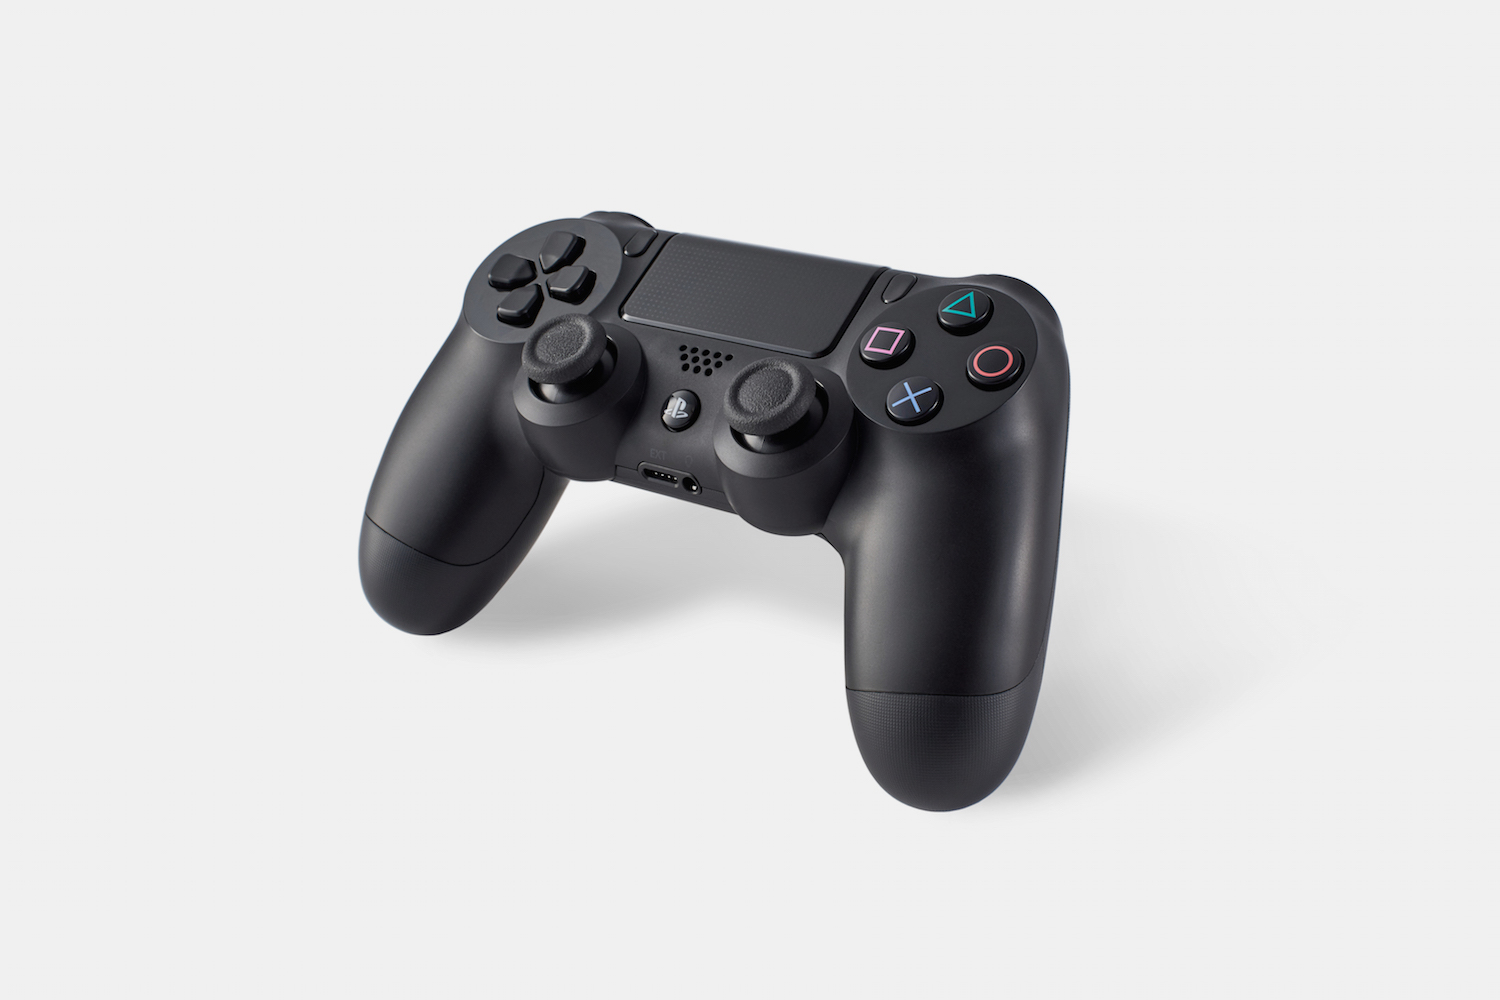 ps4 firmware update ios remote play ipad iphone playstation 4